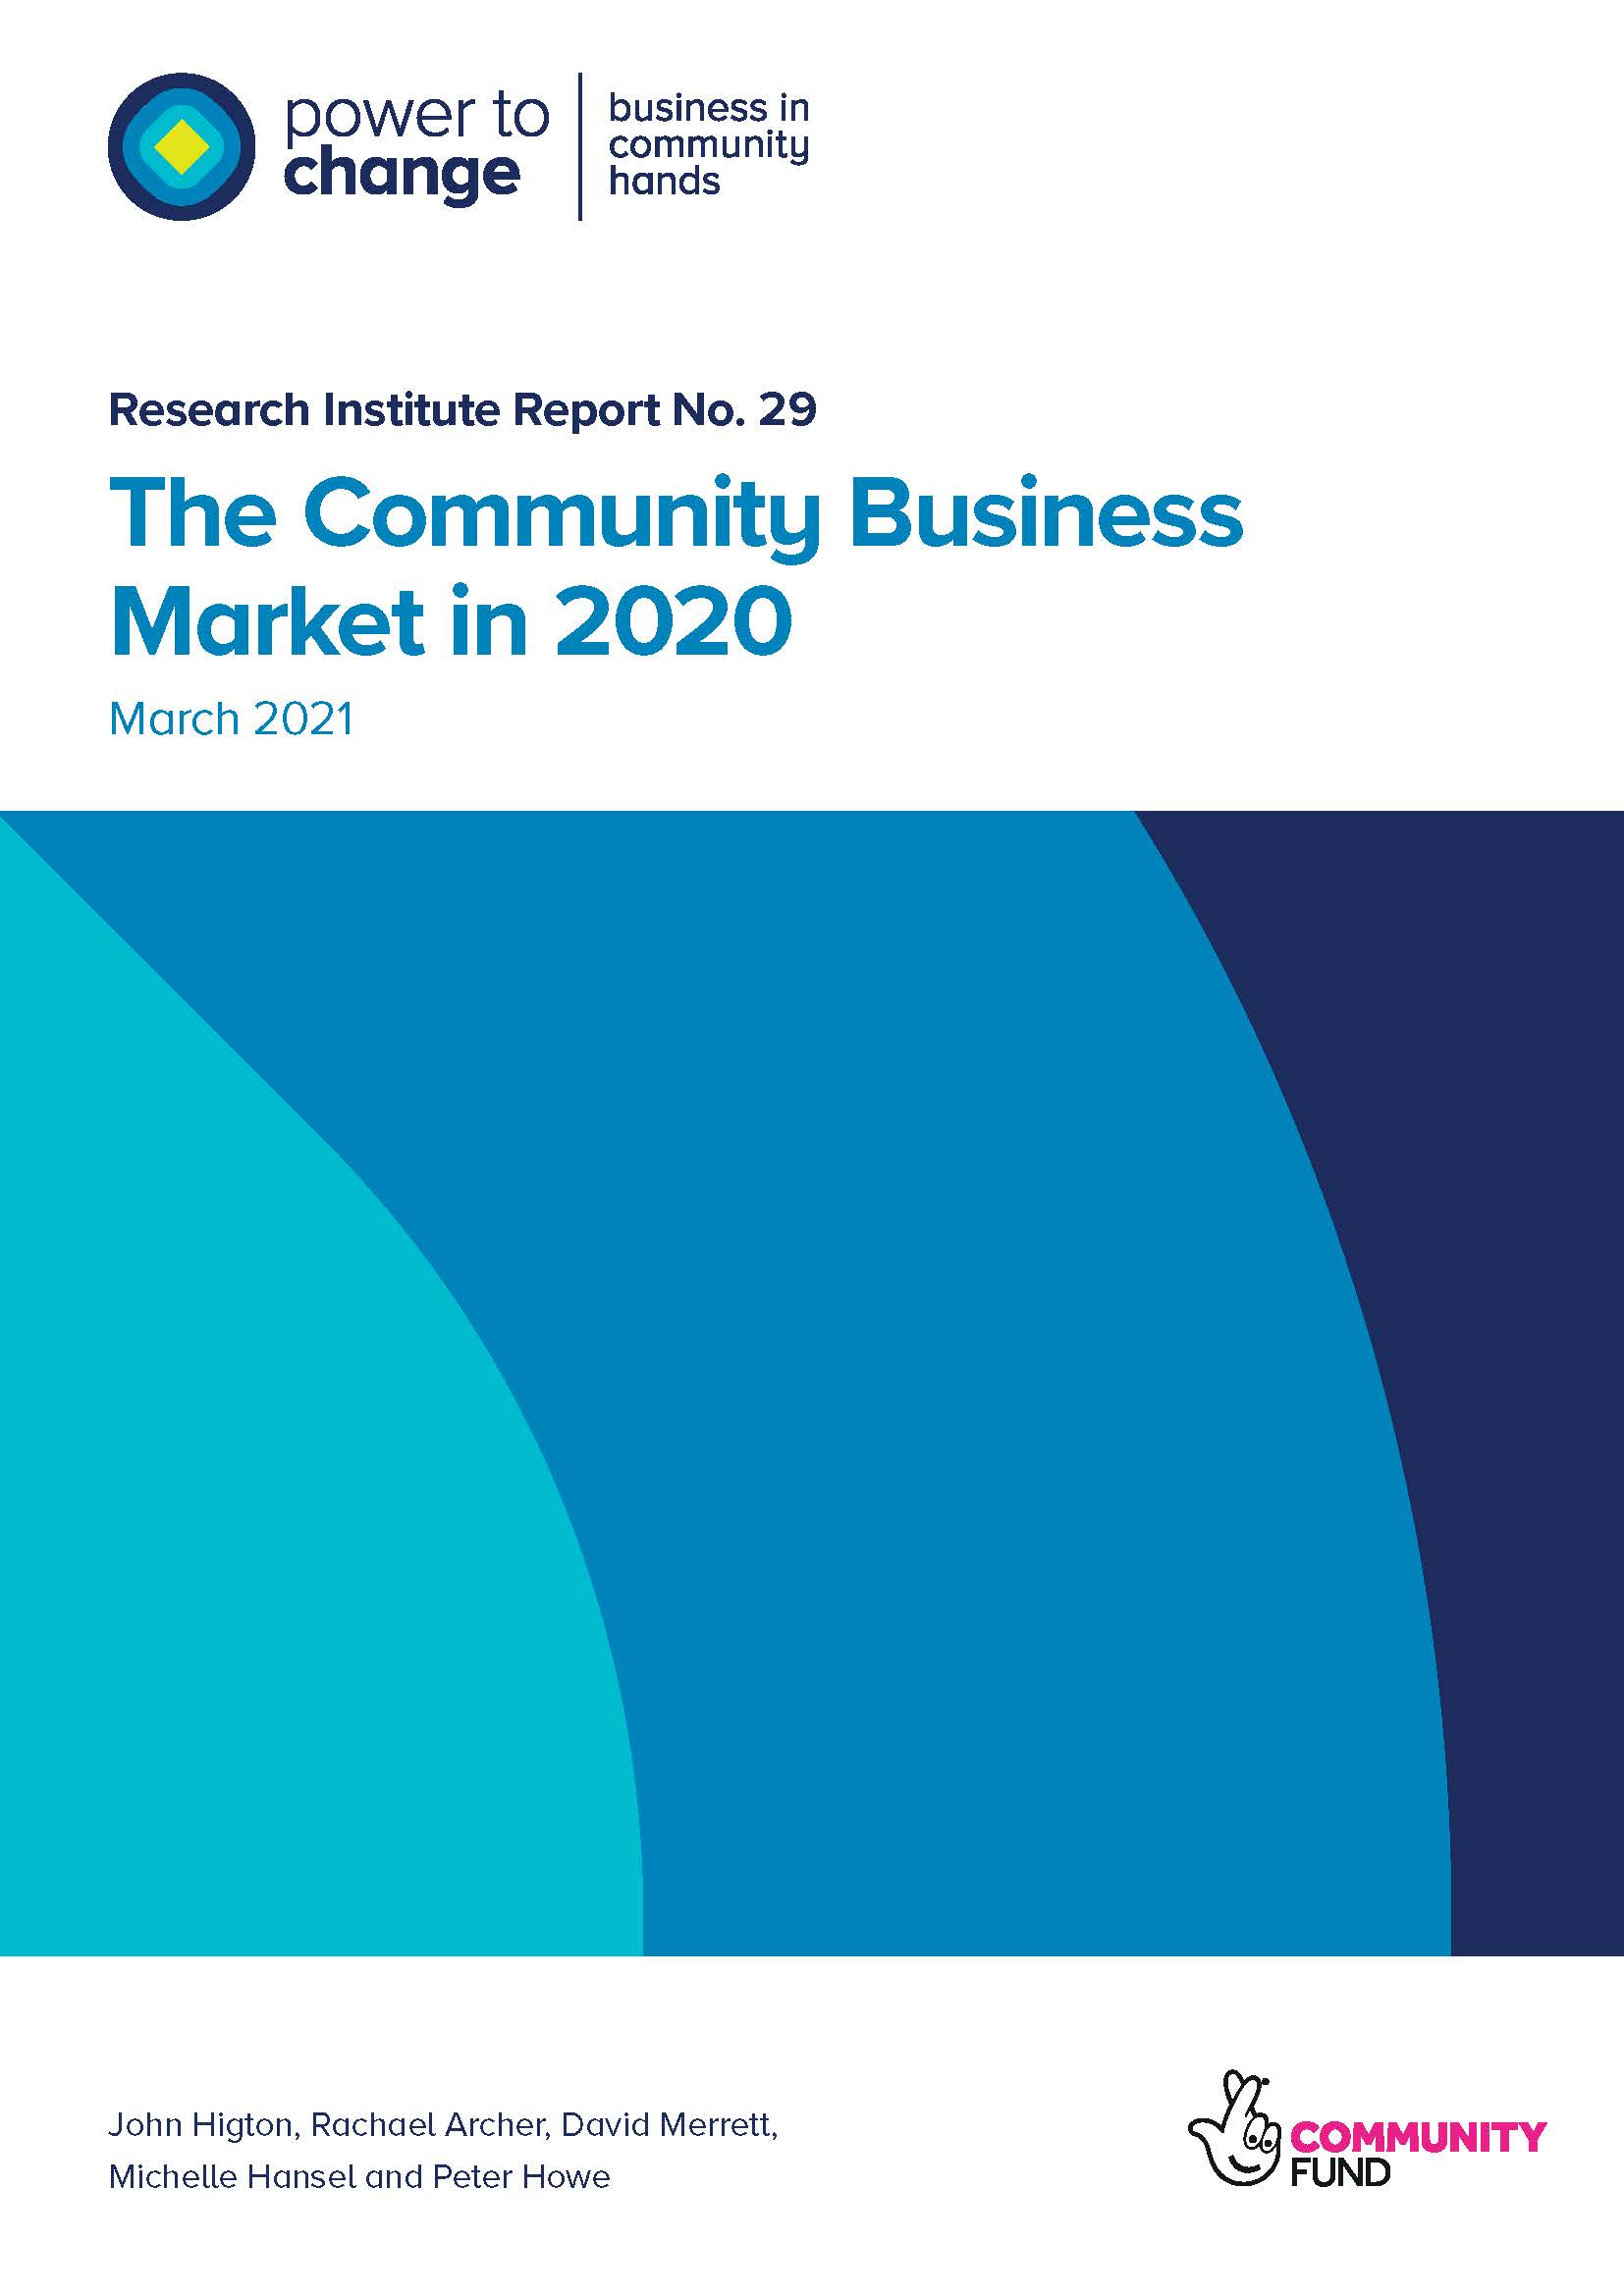 The Community Business Market in 2020